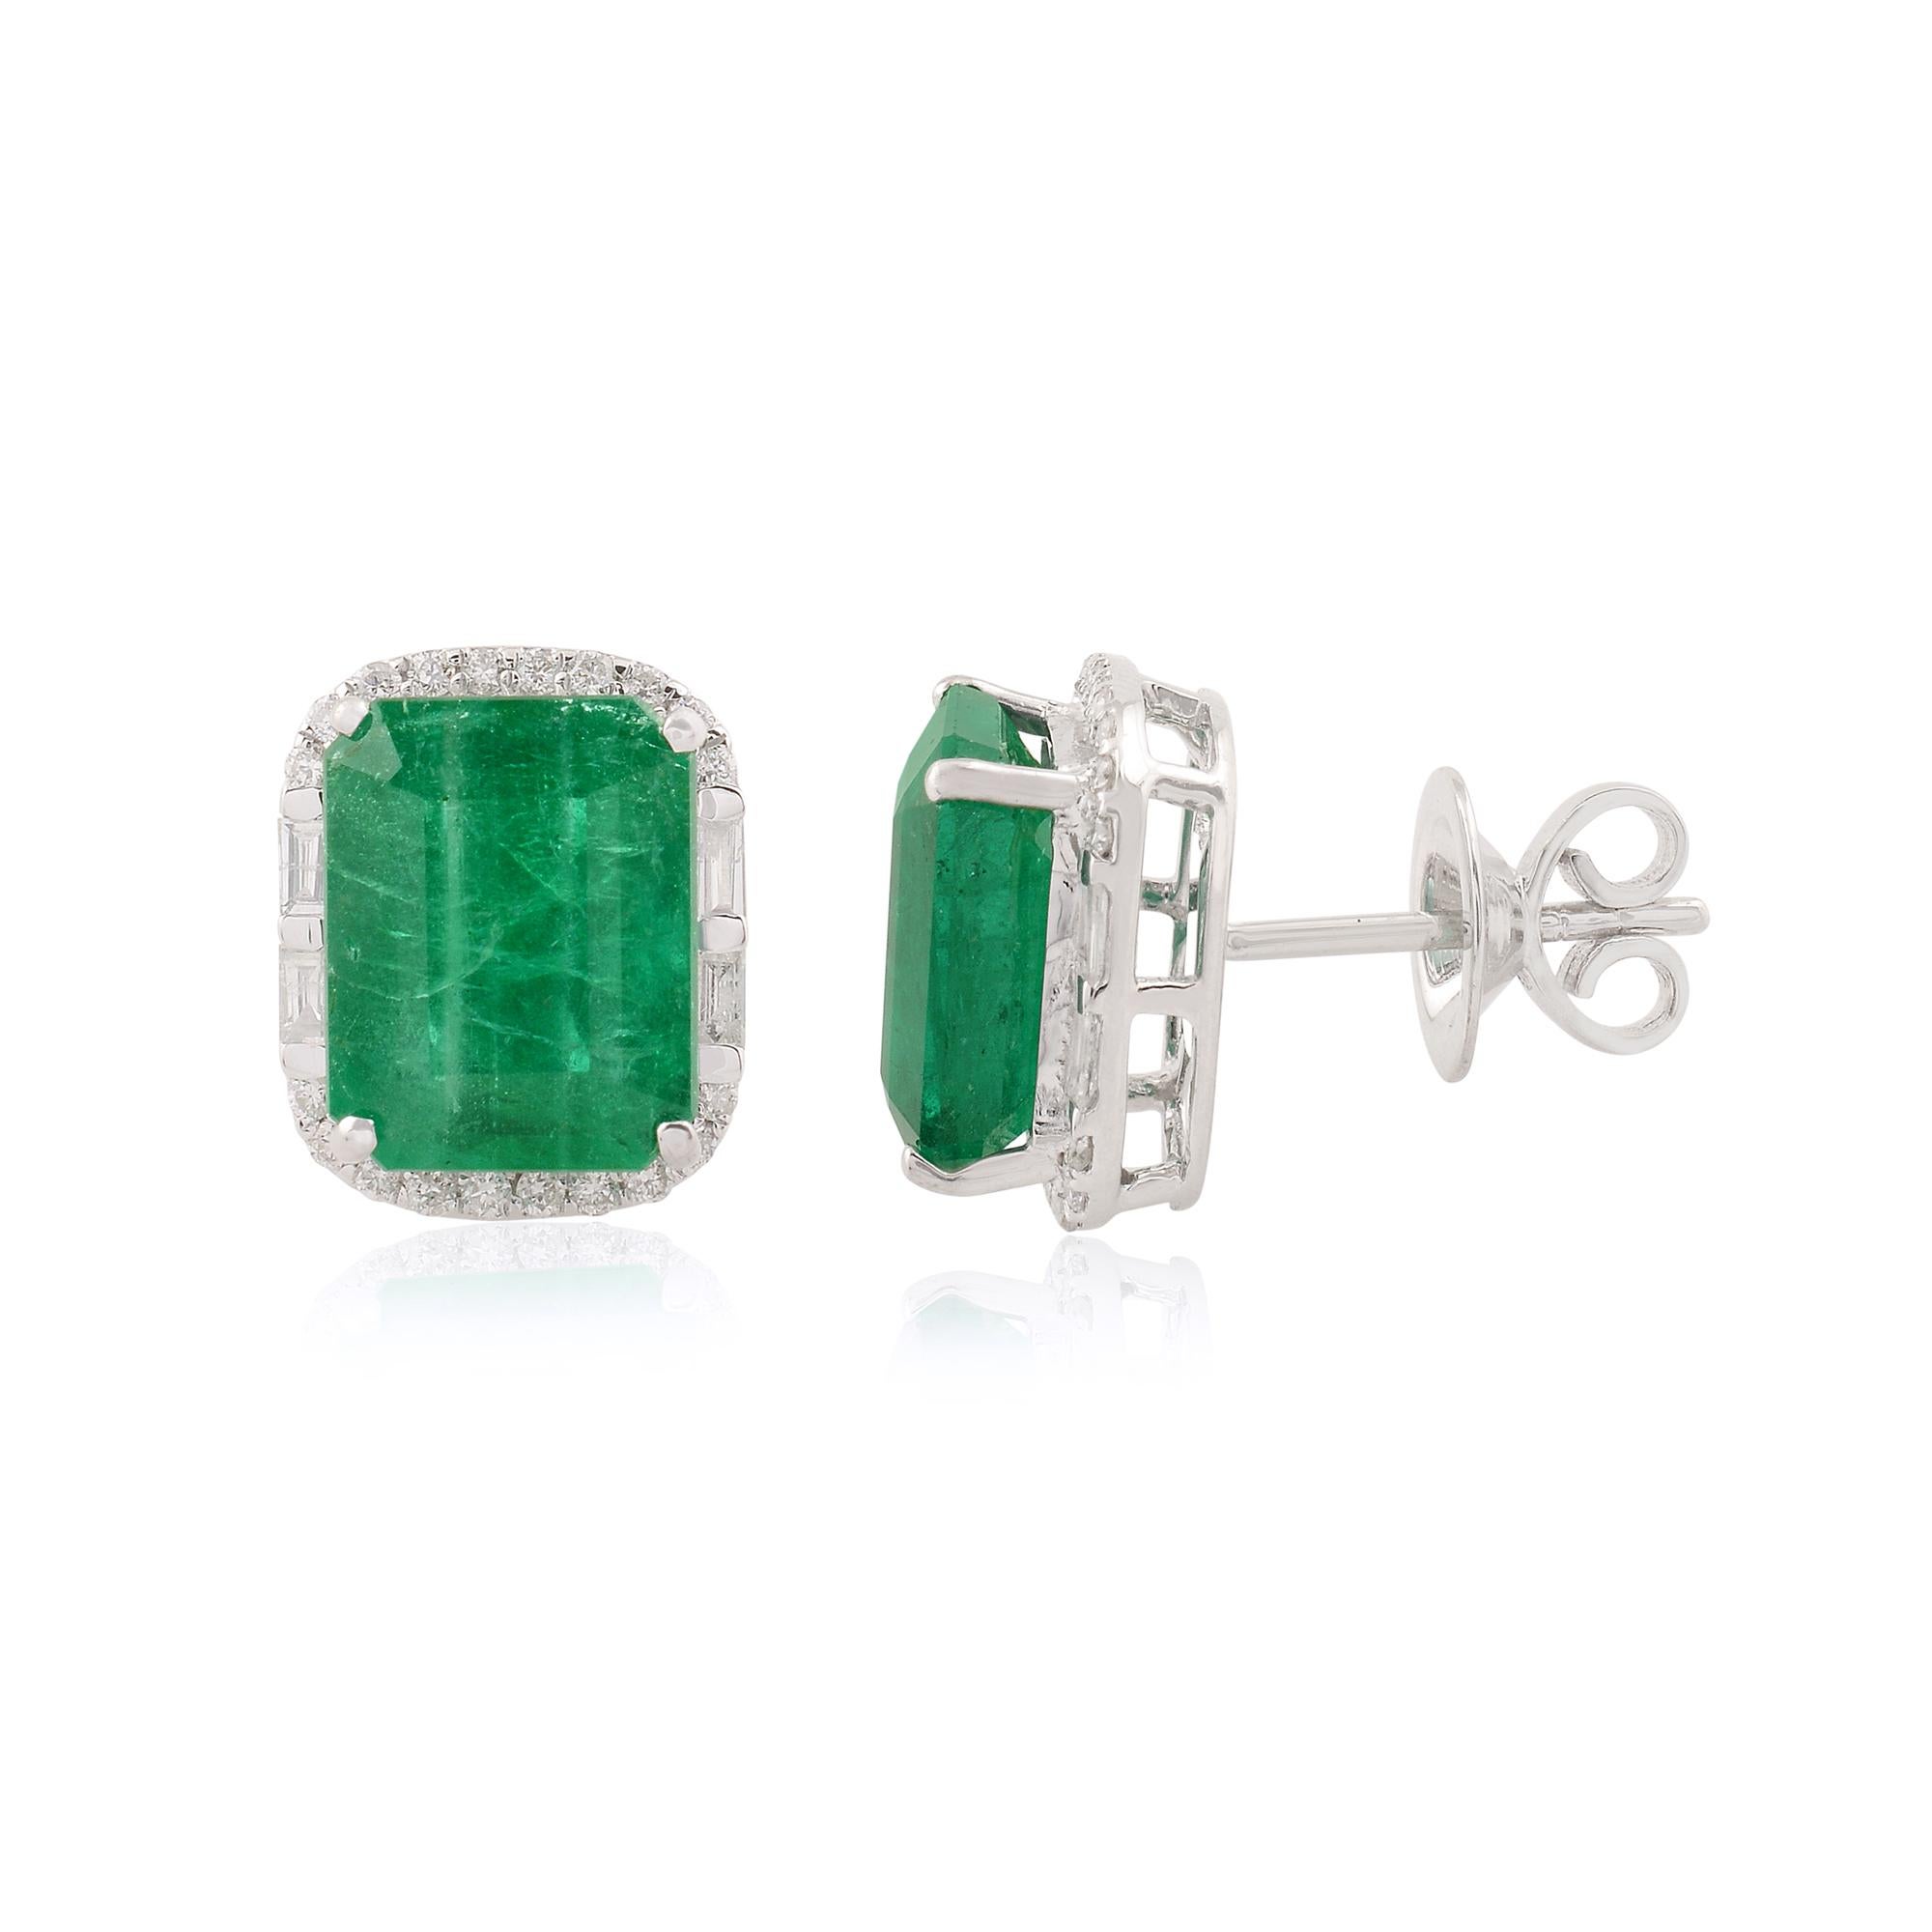 Item Code:- SEE-1076
Gross Wt :- 4.97 gm
18k Solid White Gold Wt :- 3.77 gm
Natural Diamond Wt :- 0.4 ct. ( AVERAGE DIAMOND CLARITY SI1-SI2 & COLOR H-I )
Zambian Emerald Wt :- 5.62 ct.
Earrings Size :- 12 mm Approx

✦ Sizing
.....................
We